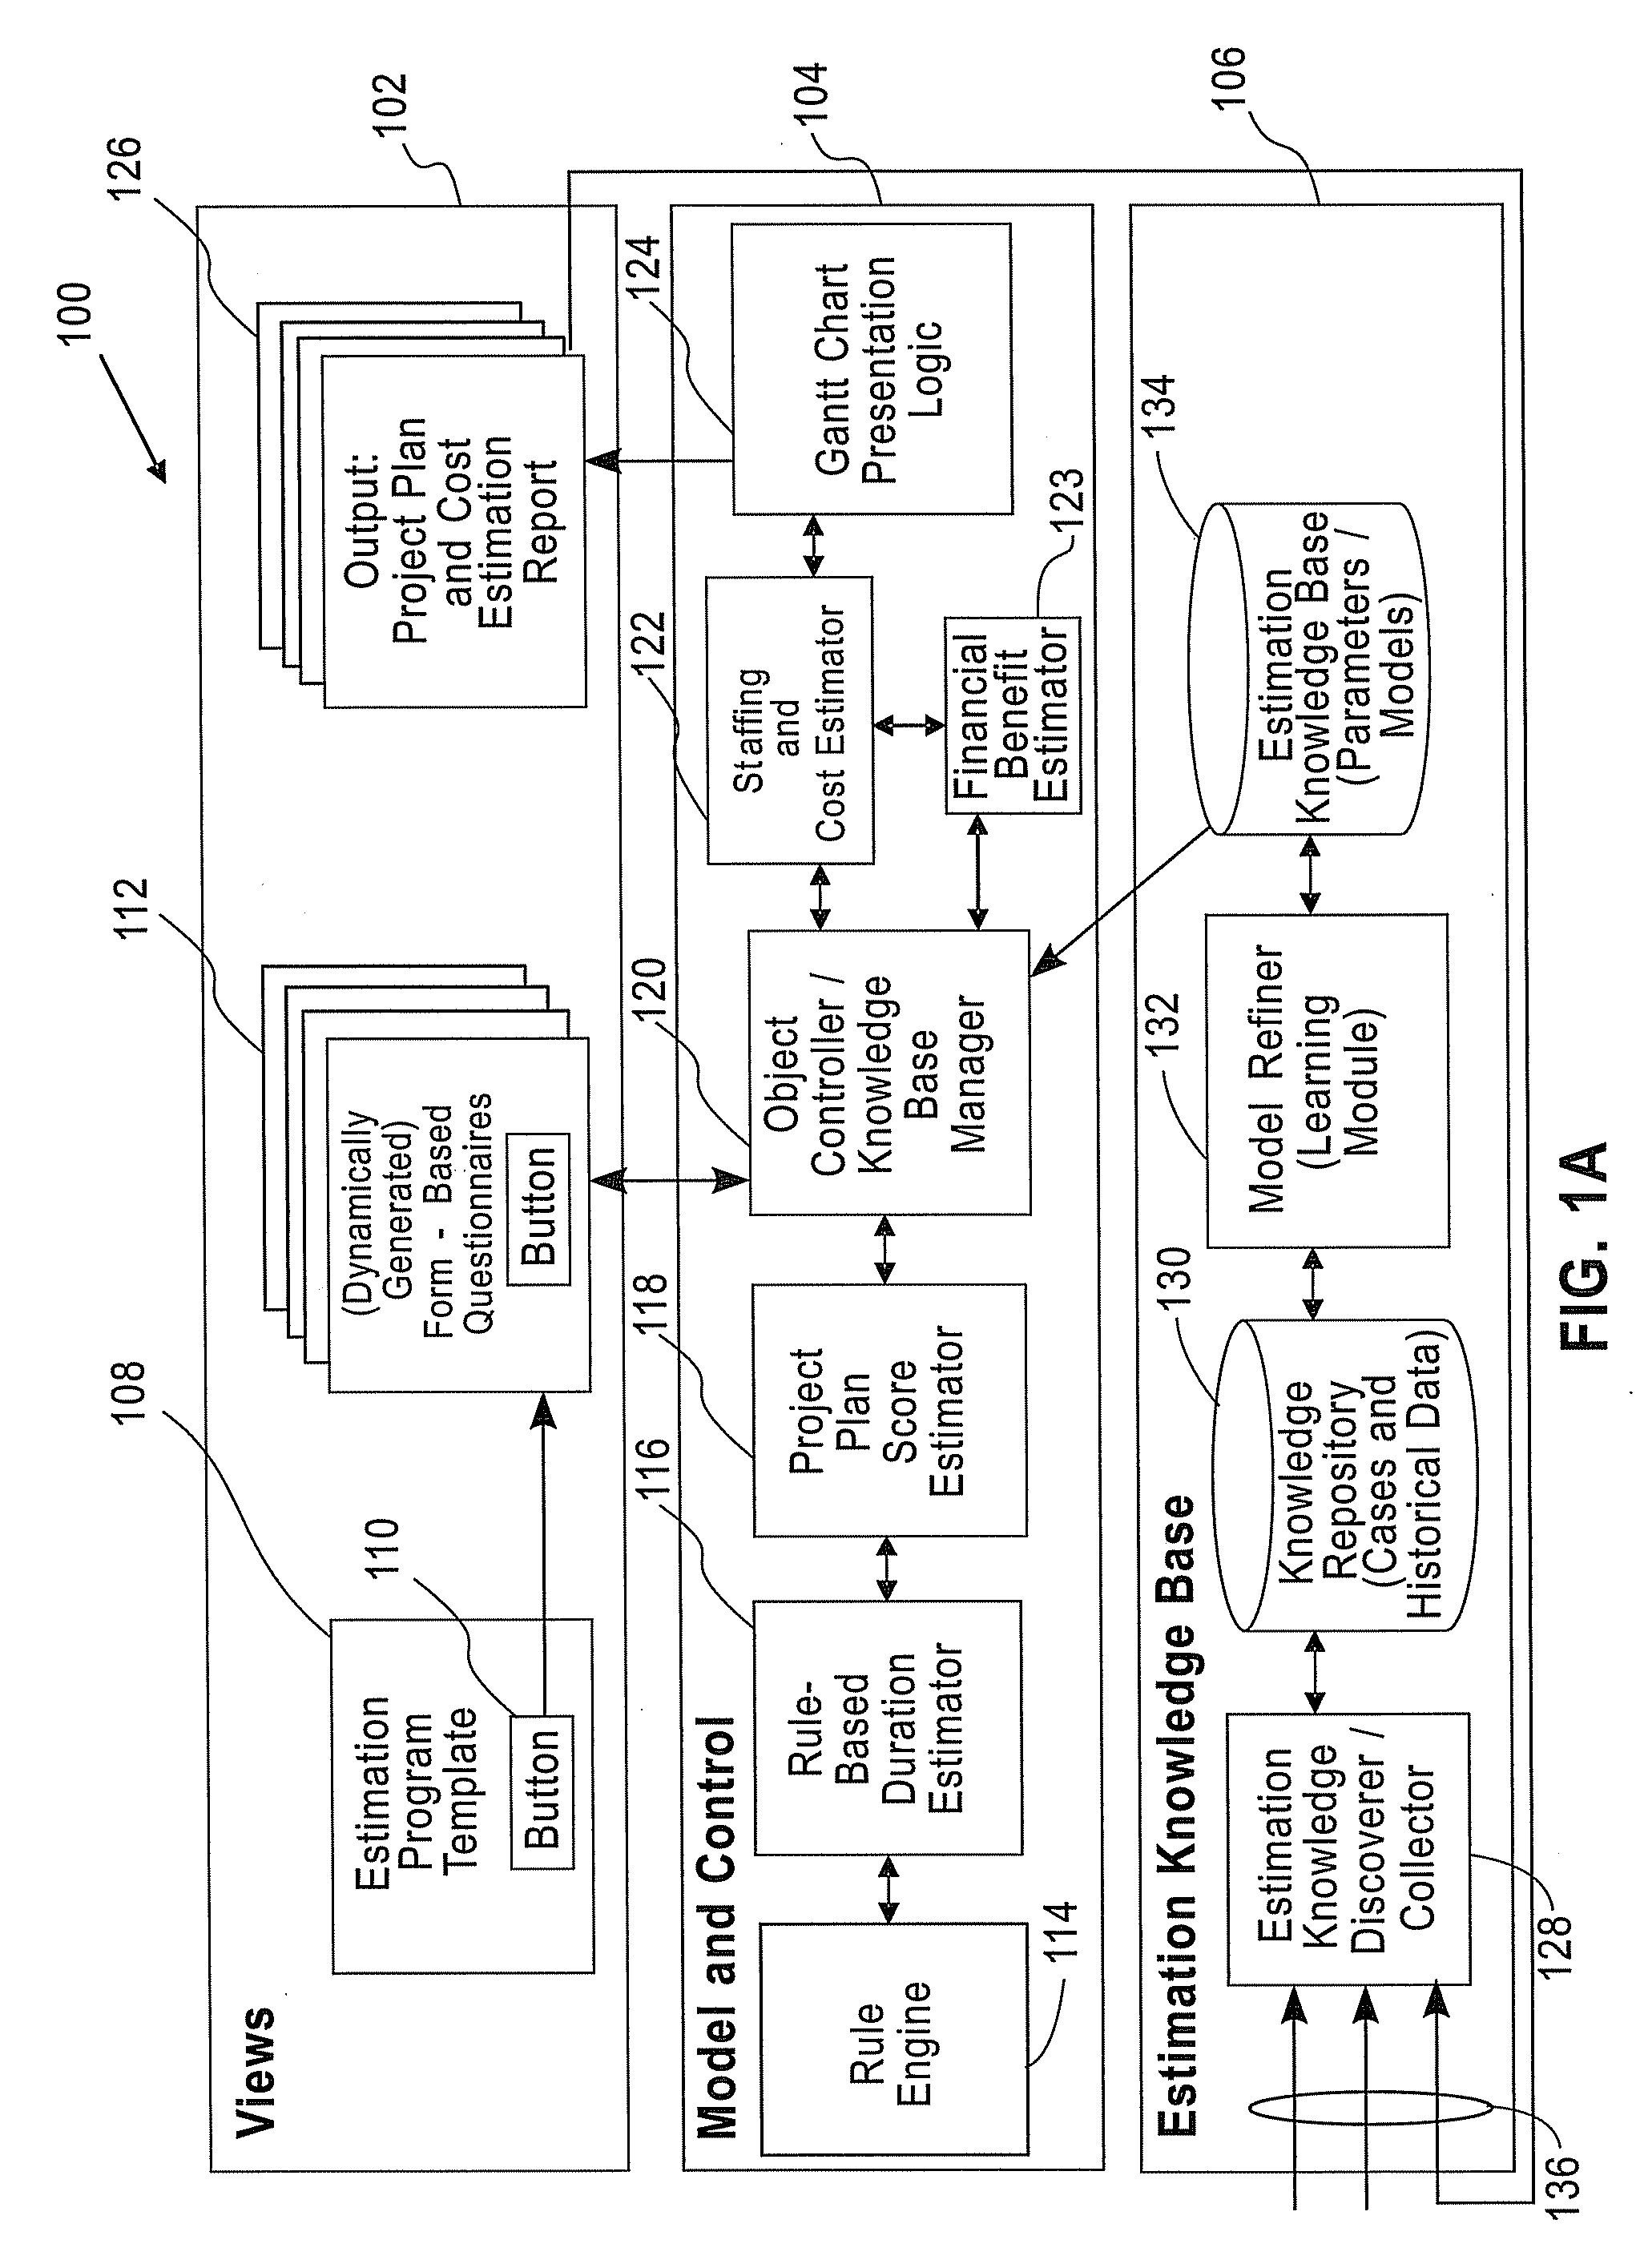 Method and system for self-calibrating project estimation models for packaged software applications